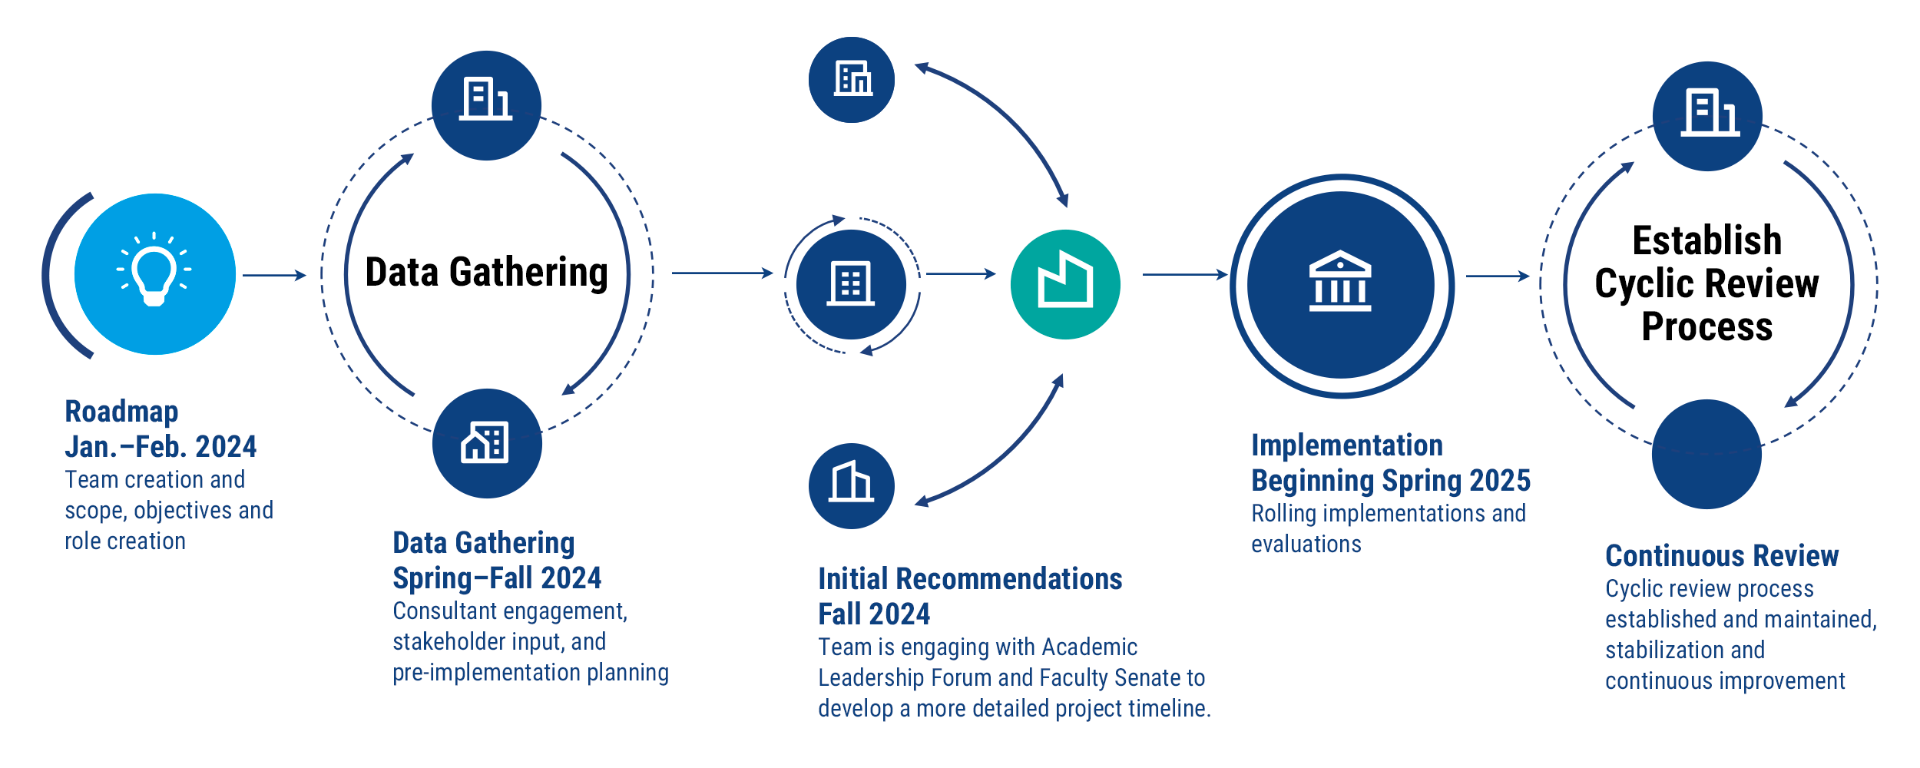 Graphic that shows the timeline and each step in the APPR process, from data gathering to continuous review.